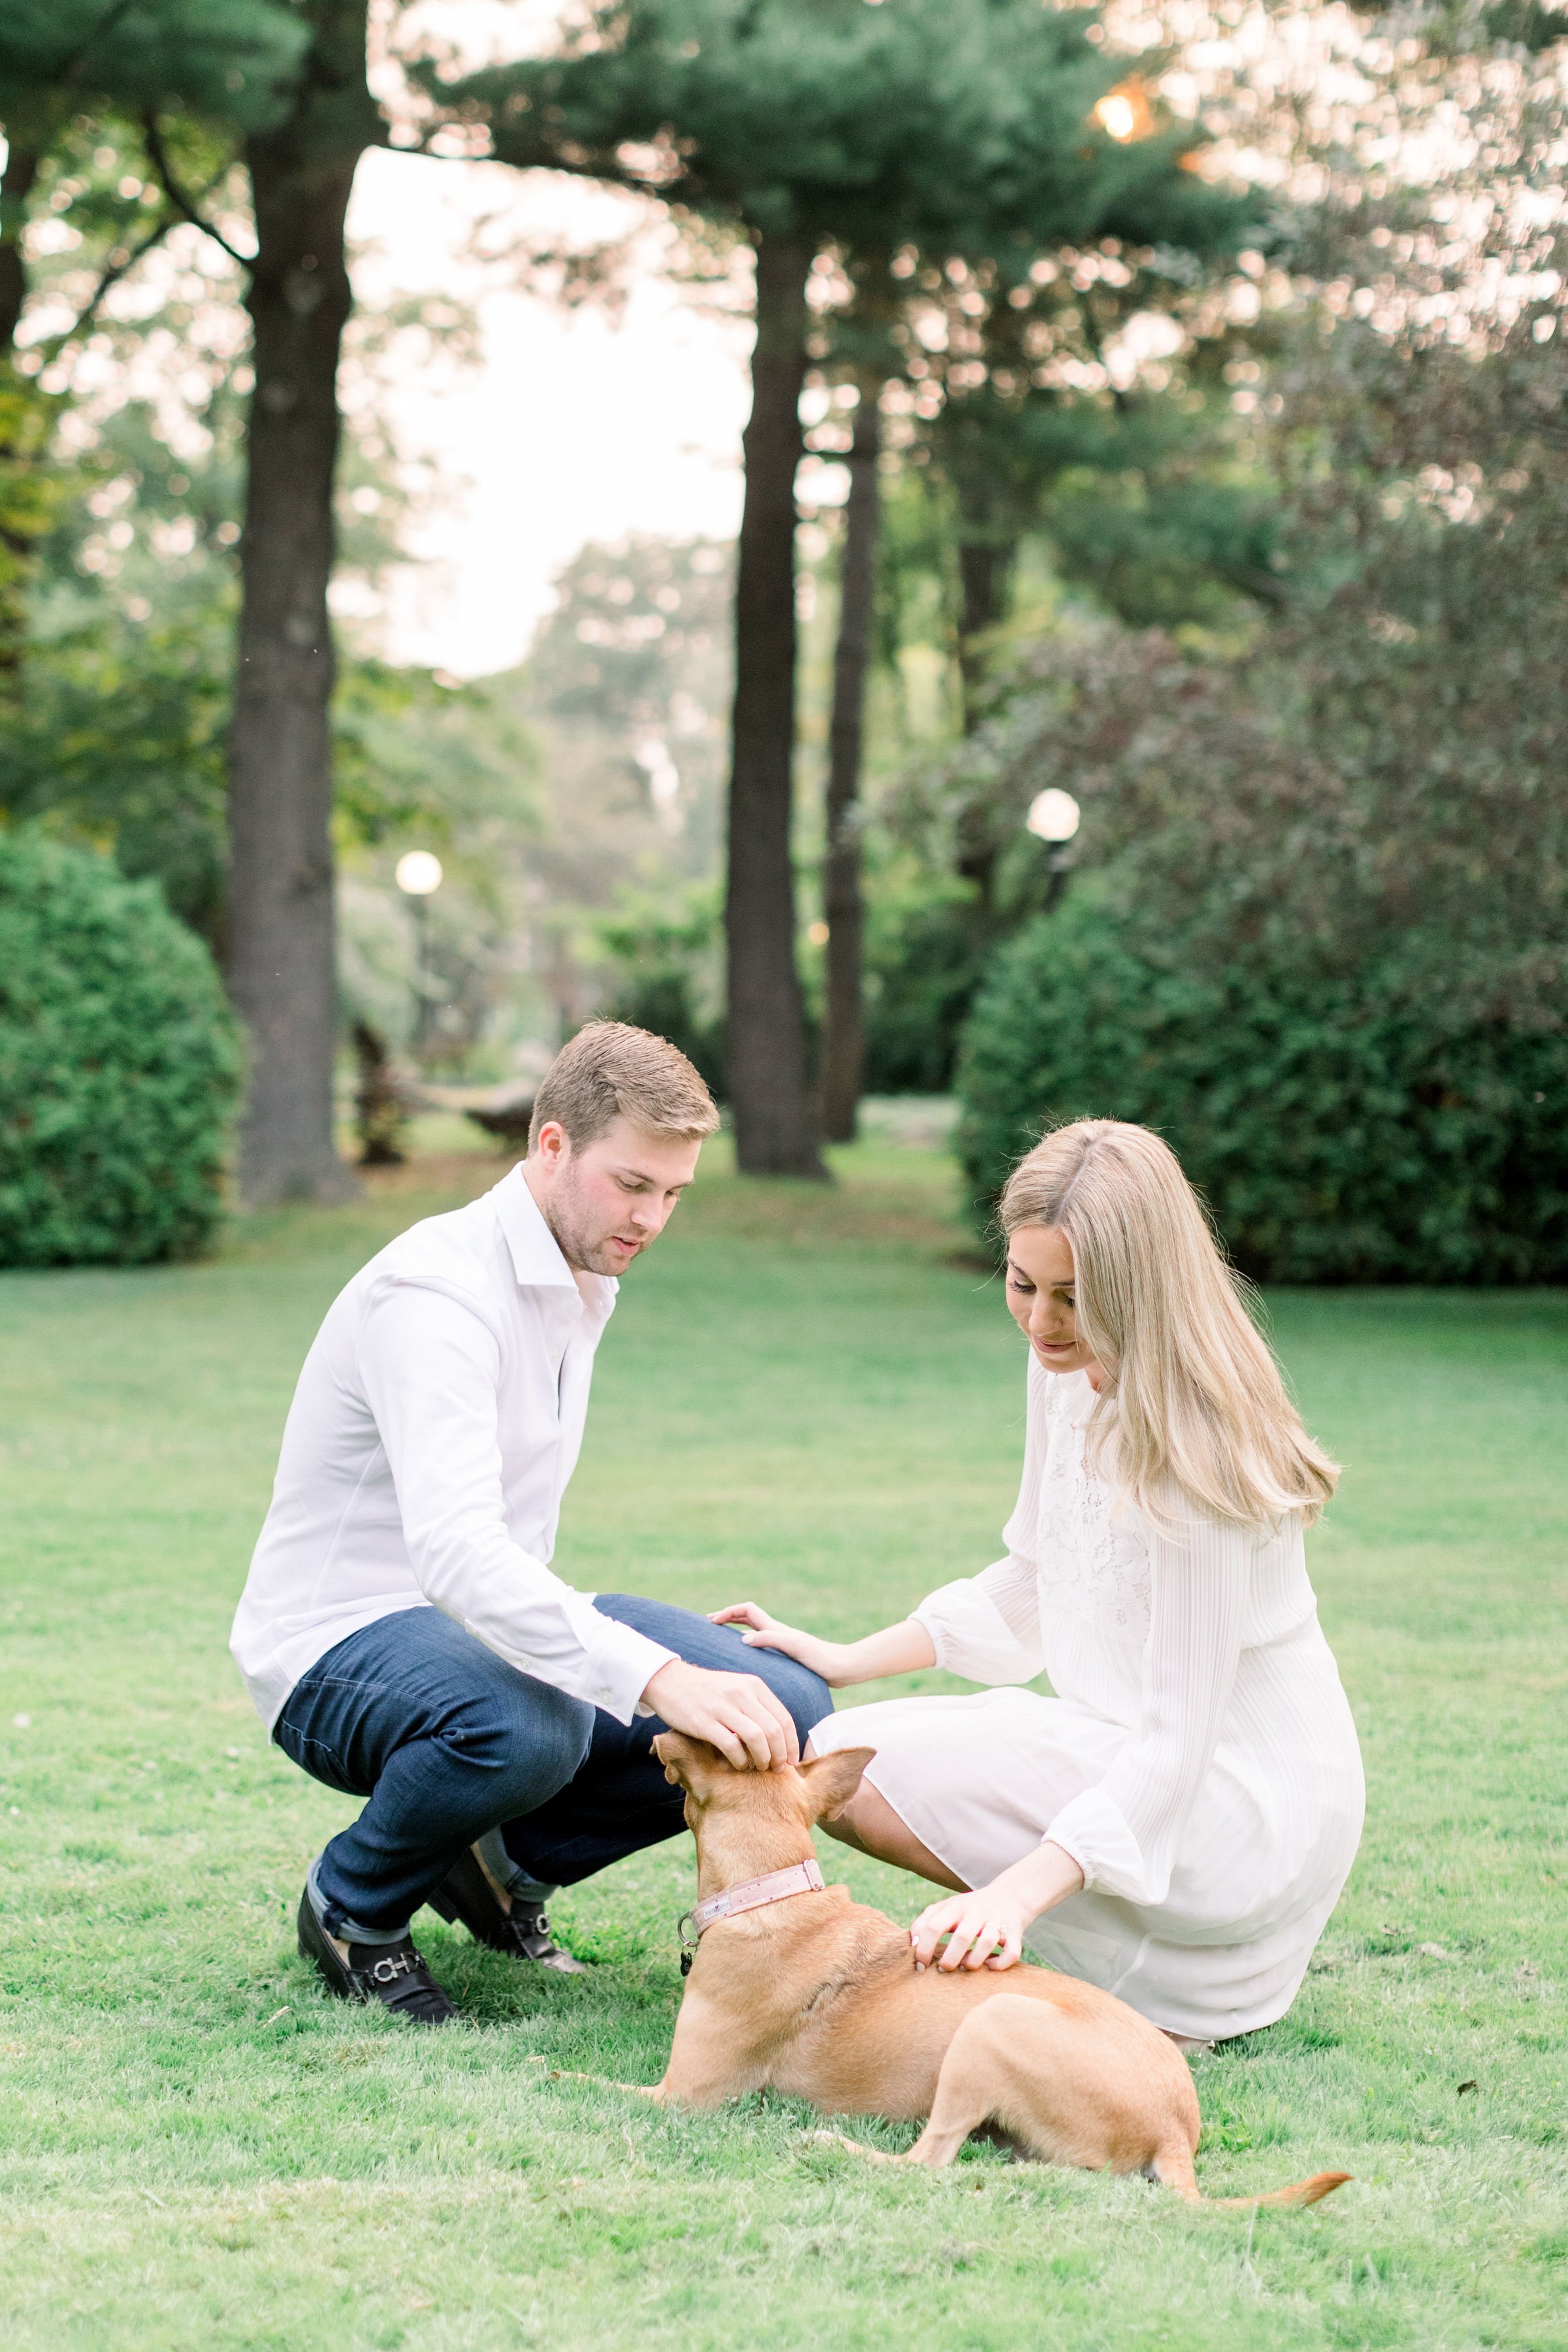  During an engagement session, Chelsea Mason Photography captures a man and woman petting their dog. dog in wedding pictures #Ottawaengagements #Ottawaweddingphotographers #engagementwithdogs #ChelseaMasonPhotography #ChelseaMasonEngagements  